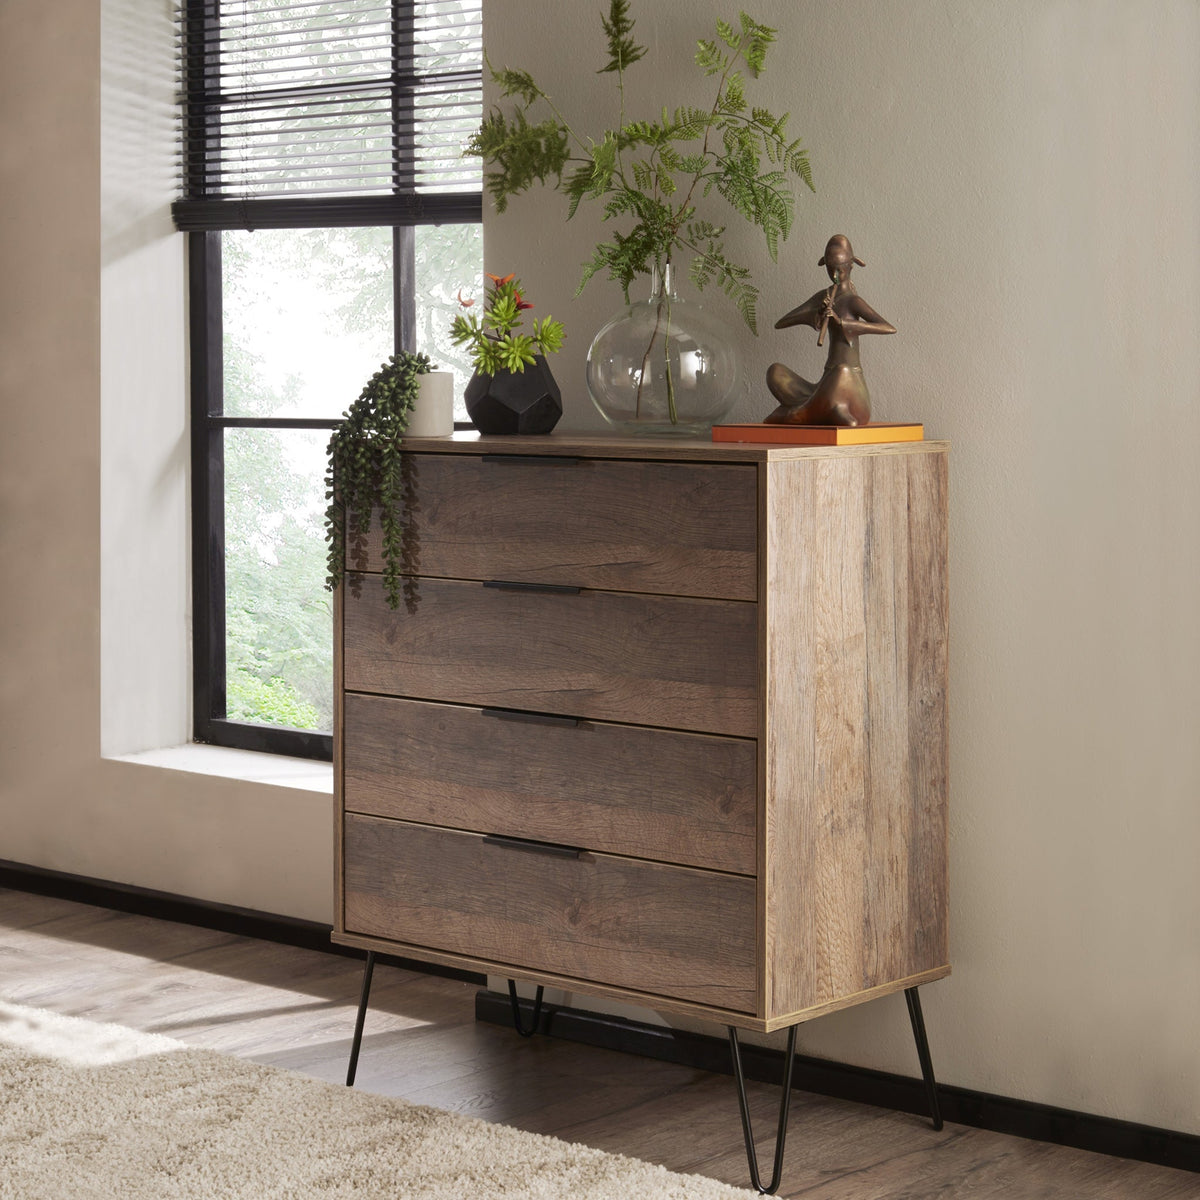 Moreno Rustic Oak Wooden 4 Drawer Chest with Black Hairpin Legs for bedroom